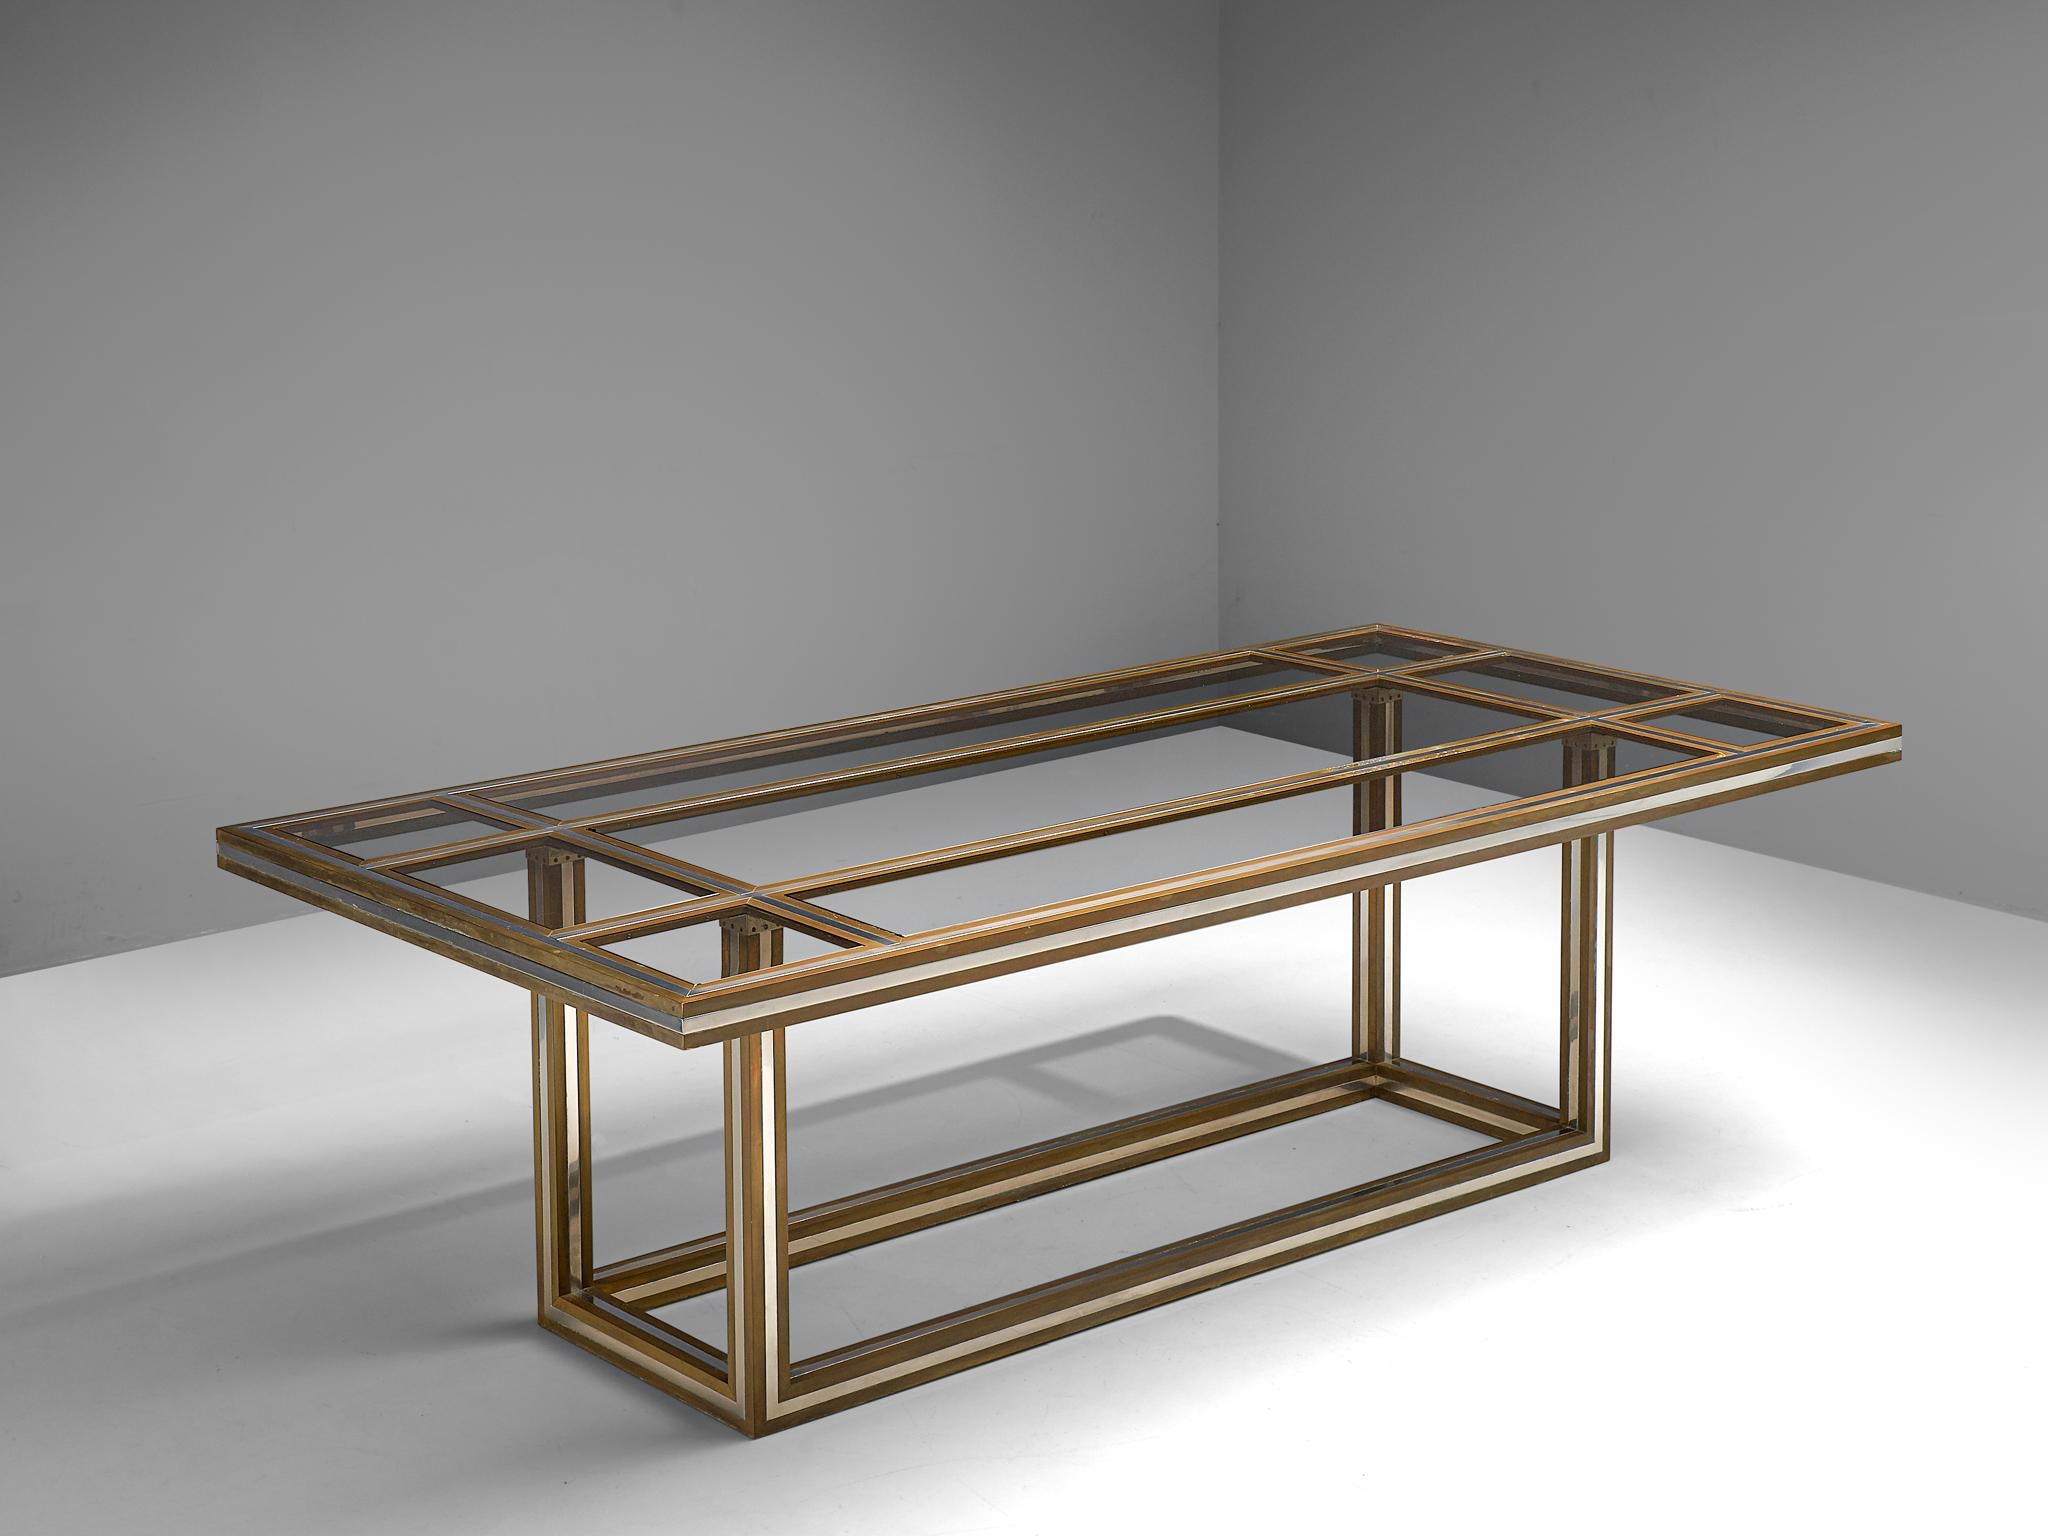 Romeo Rega, dining table, glass, metal and brass, Italy, 1970s

Exquisite brass and metal dining or conference table by Romeo Rega is from the 1970s. The table features a geometric, clean-lined frame. The top is inlayed with smoked glass of